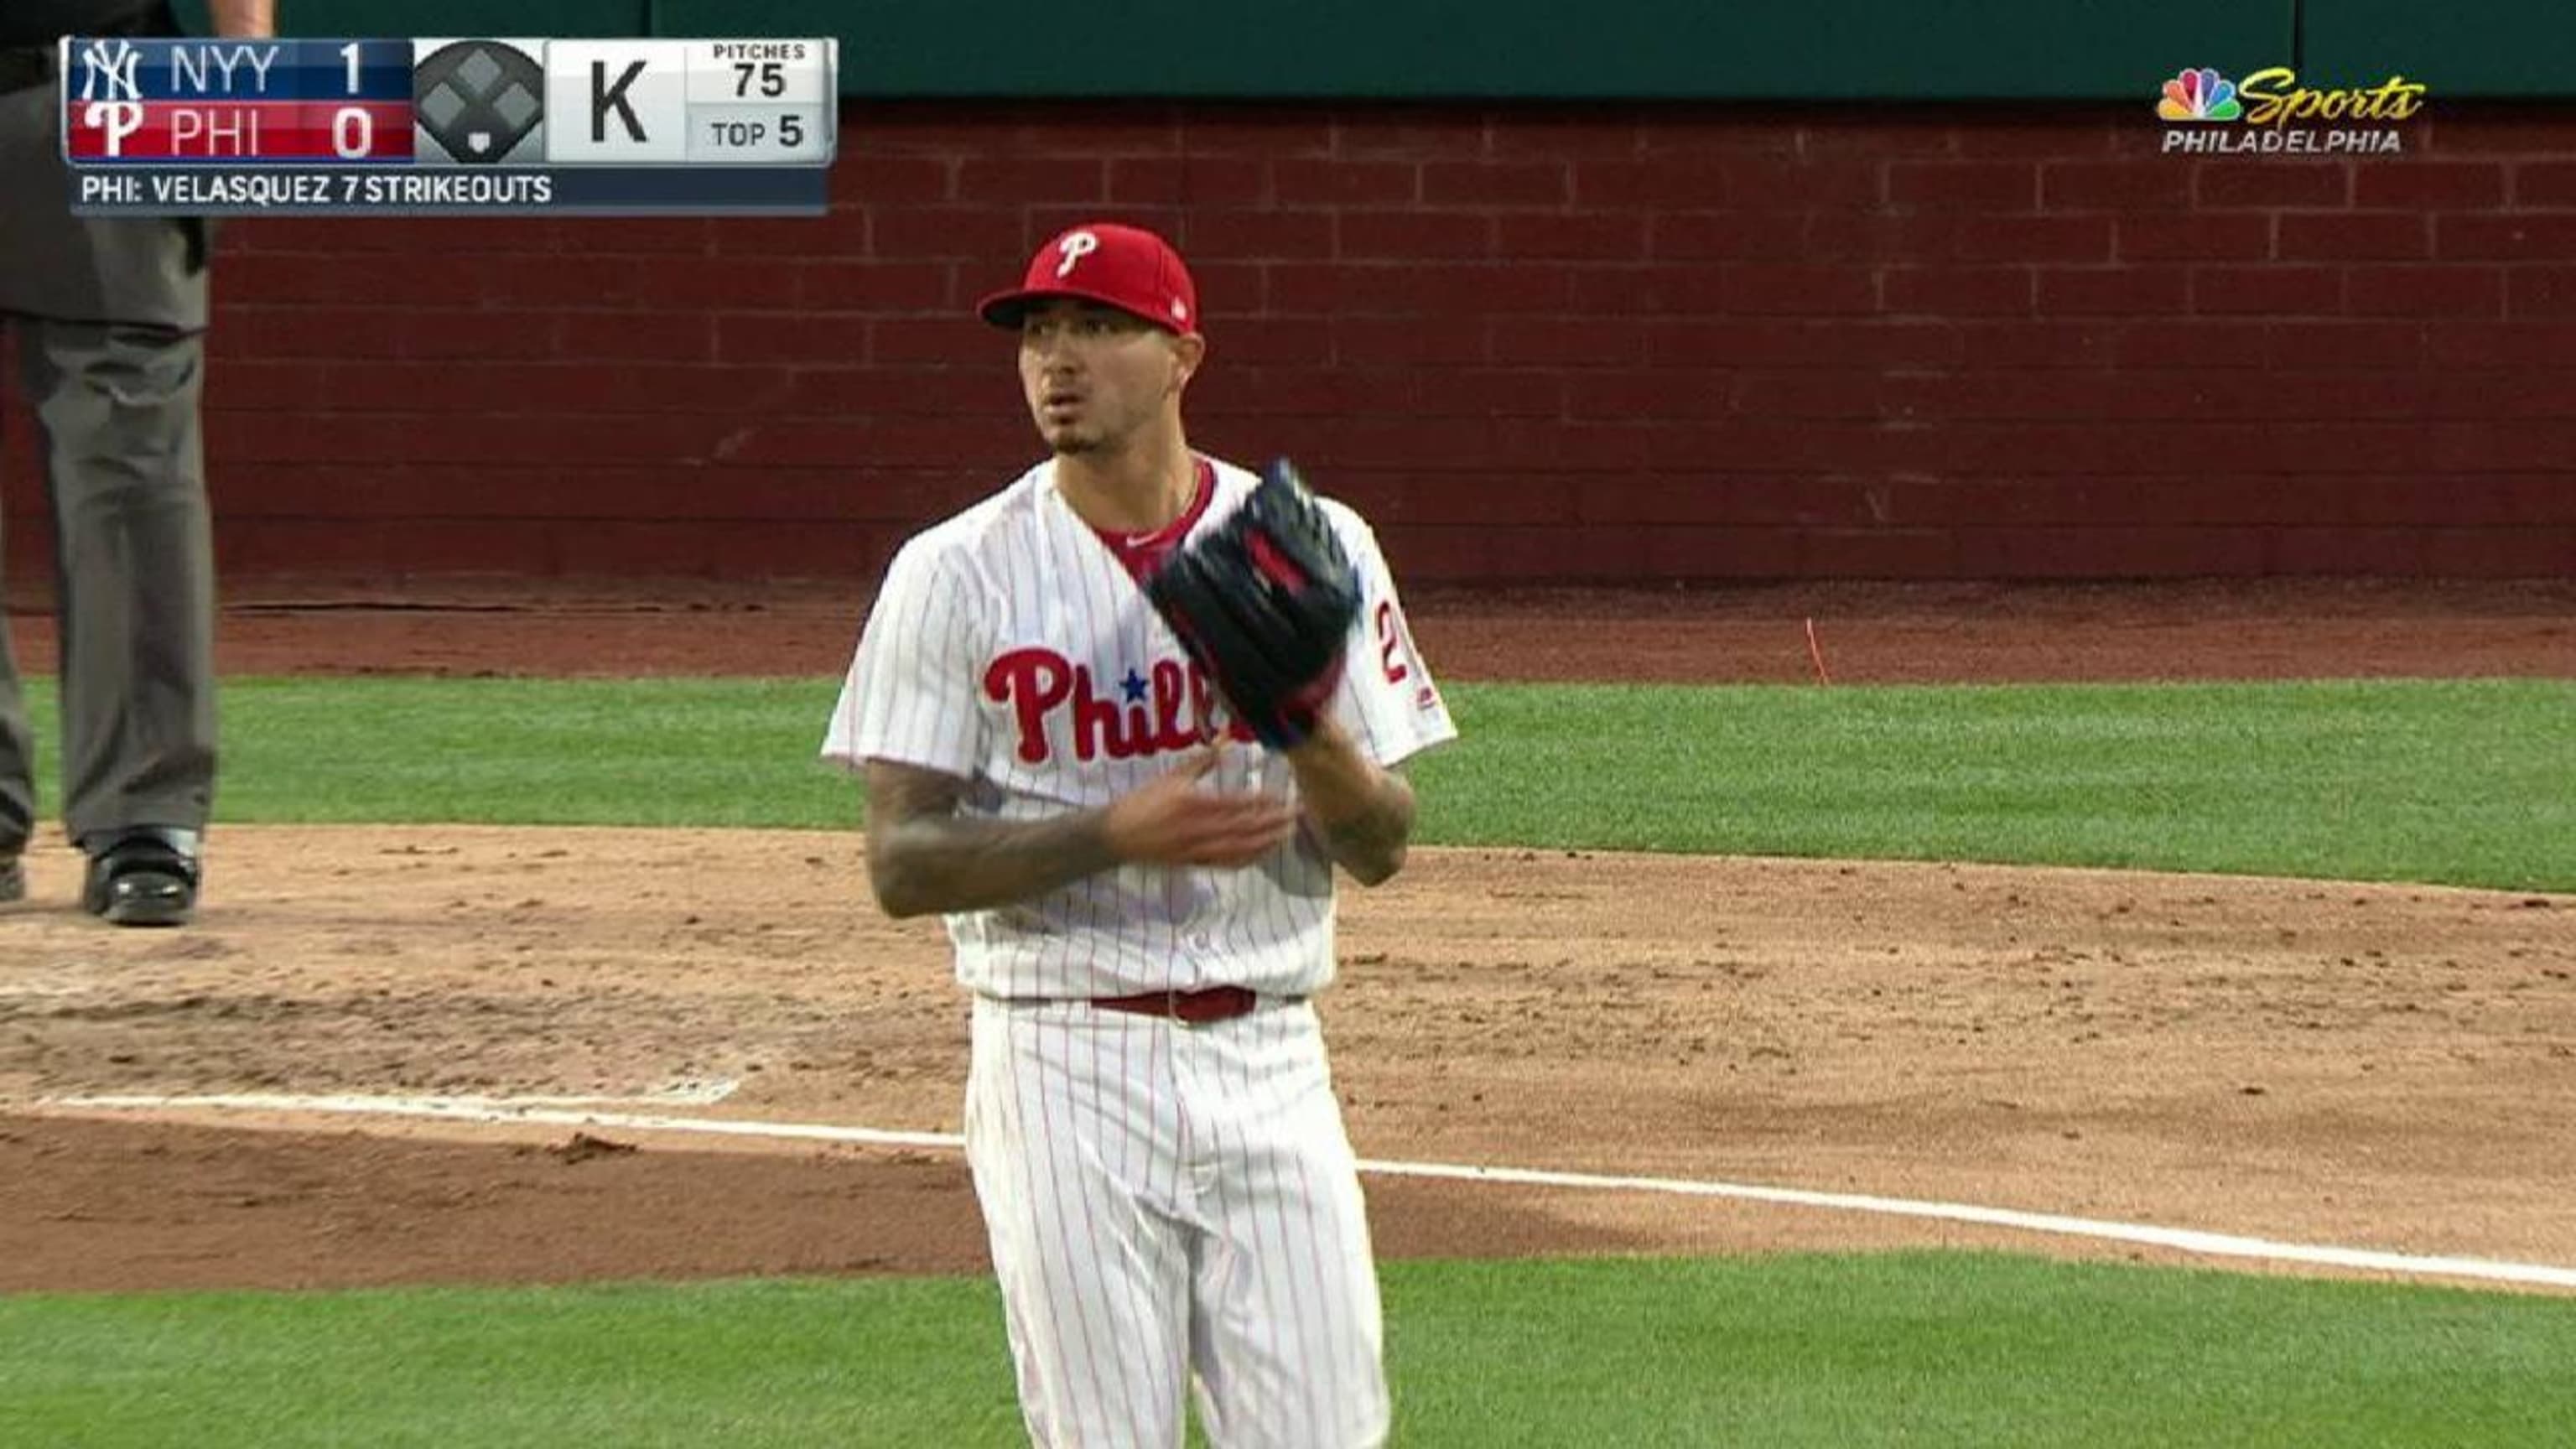 Rhys Hoskins apologizes for confrontation with fan in Phillies-Yankees